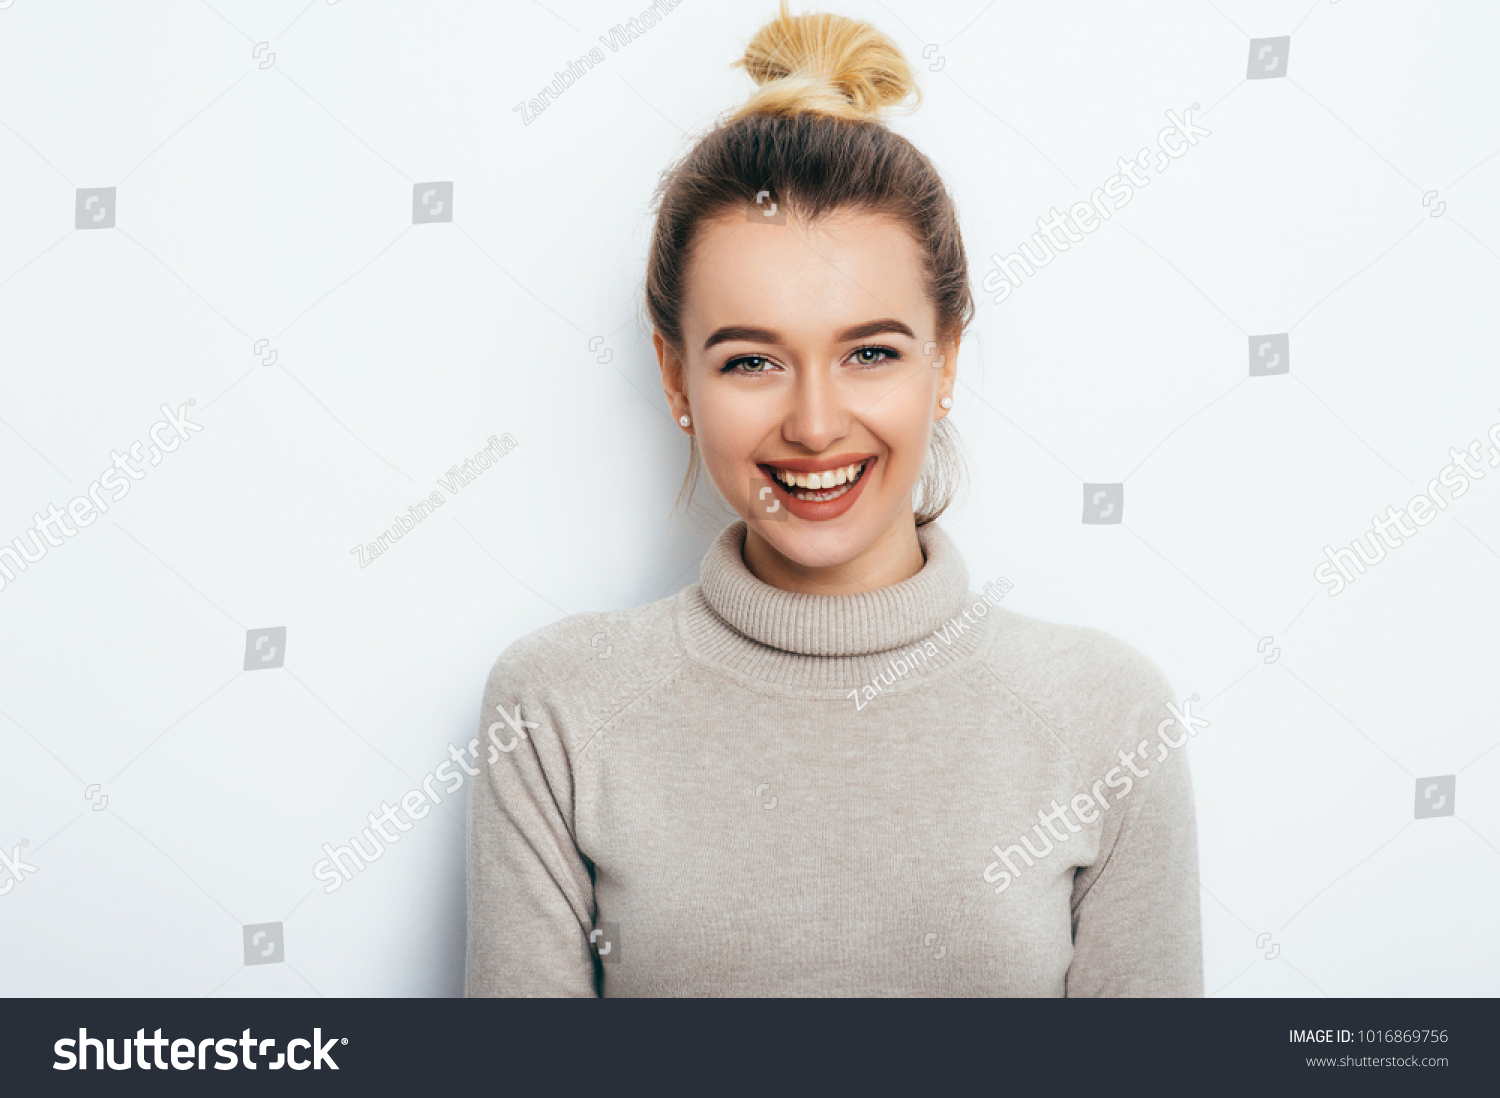 Horizontal portrait of cheerful woman with appealing smile, having hair bun wearing in sweater isolated over white background.  Beautiful female showing her pleasant emotions. People Beauty Fashion  #1016869756